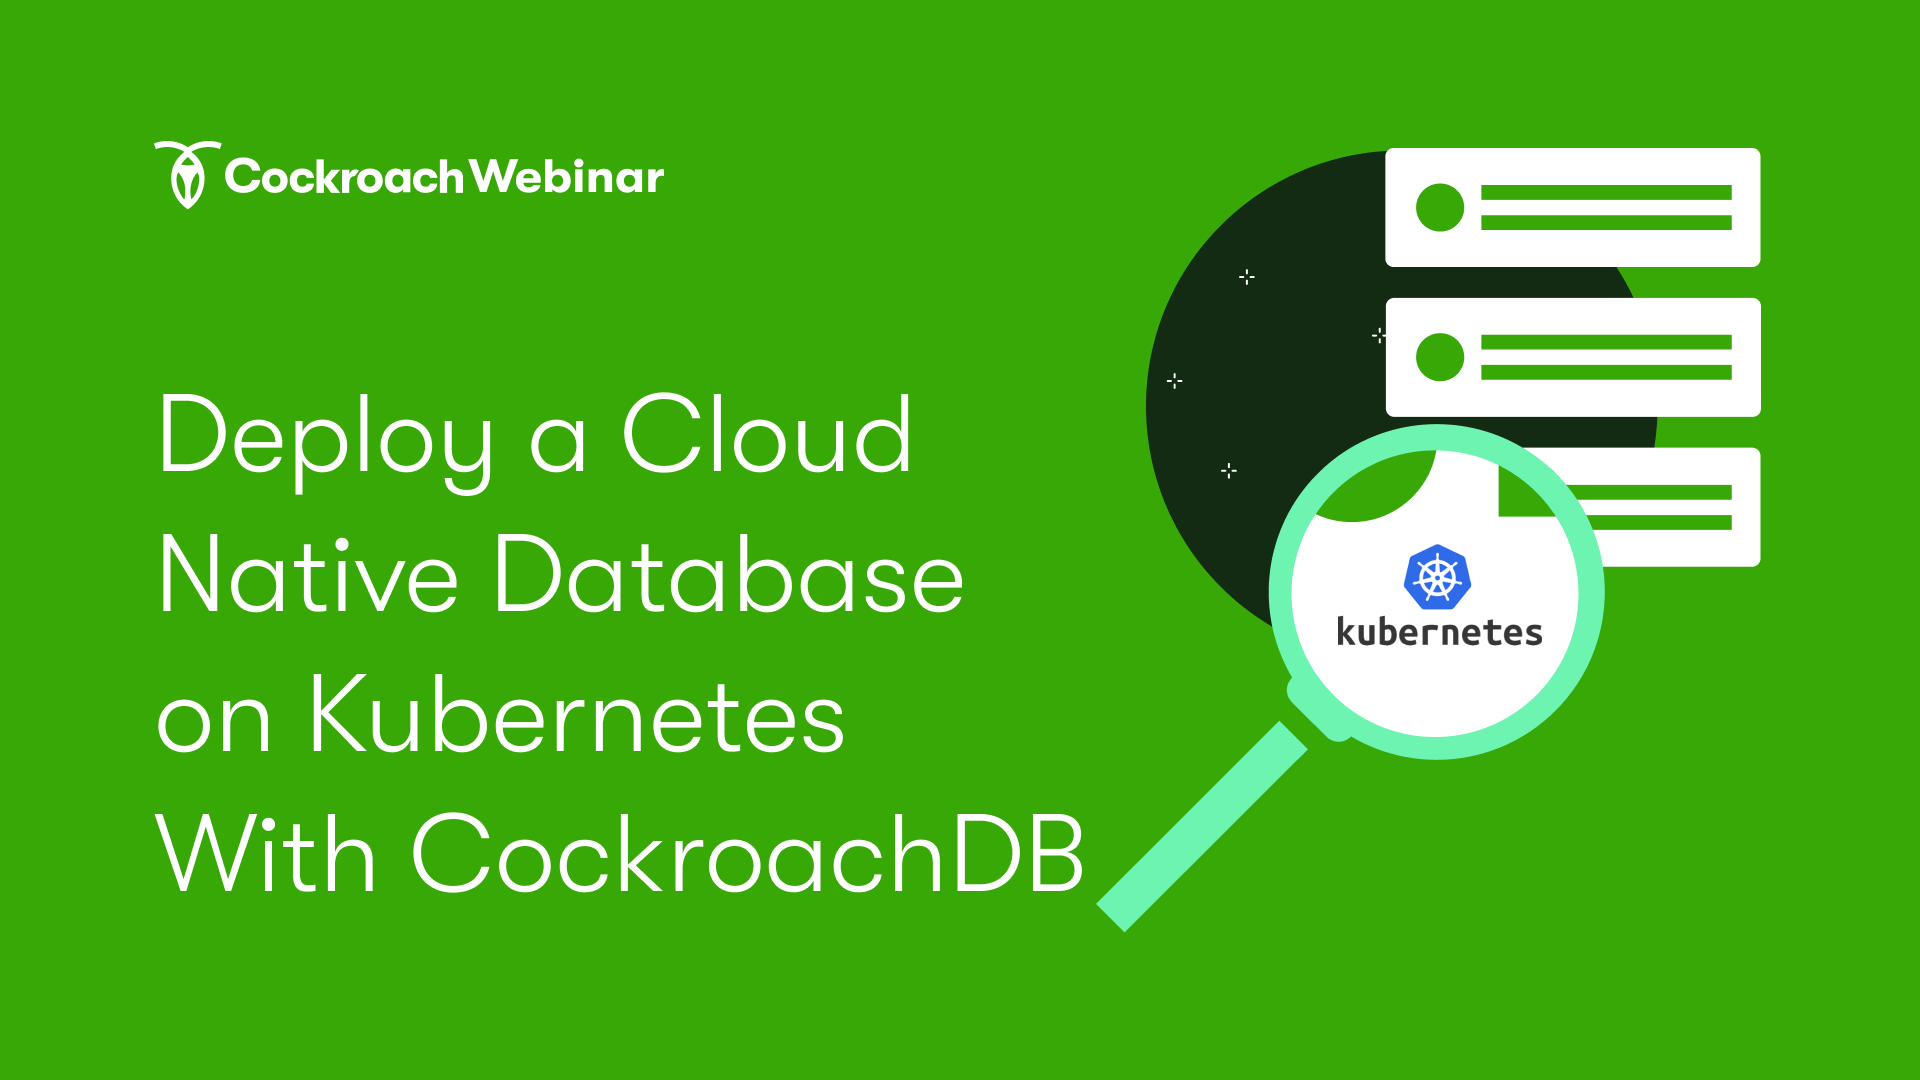 Deploy a Cloud Native Database on Kubernetes with CockroachDB